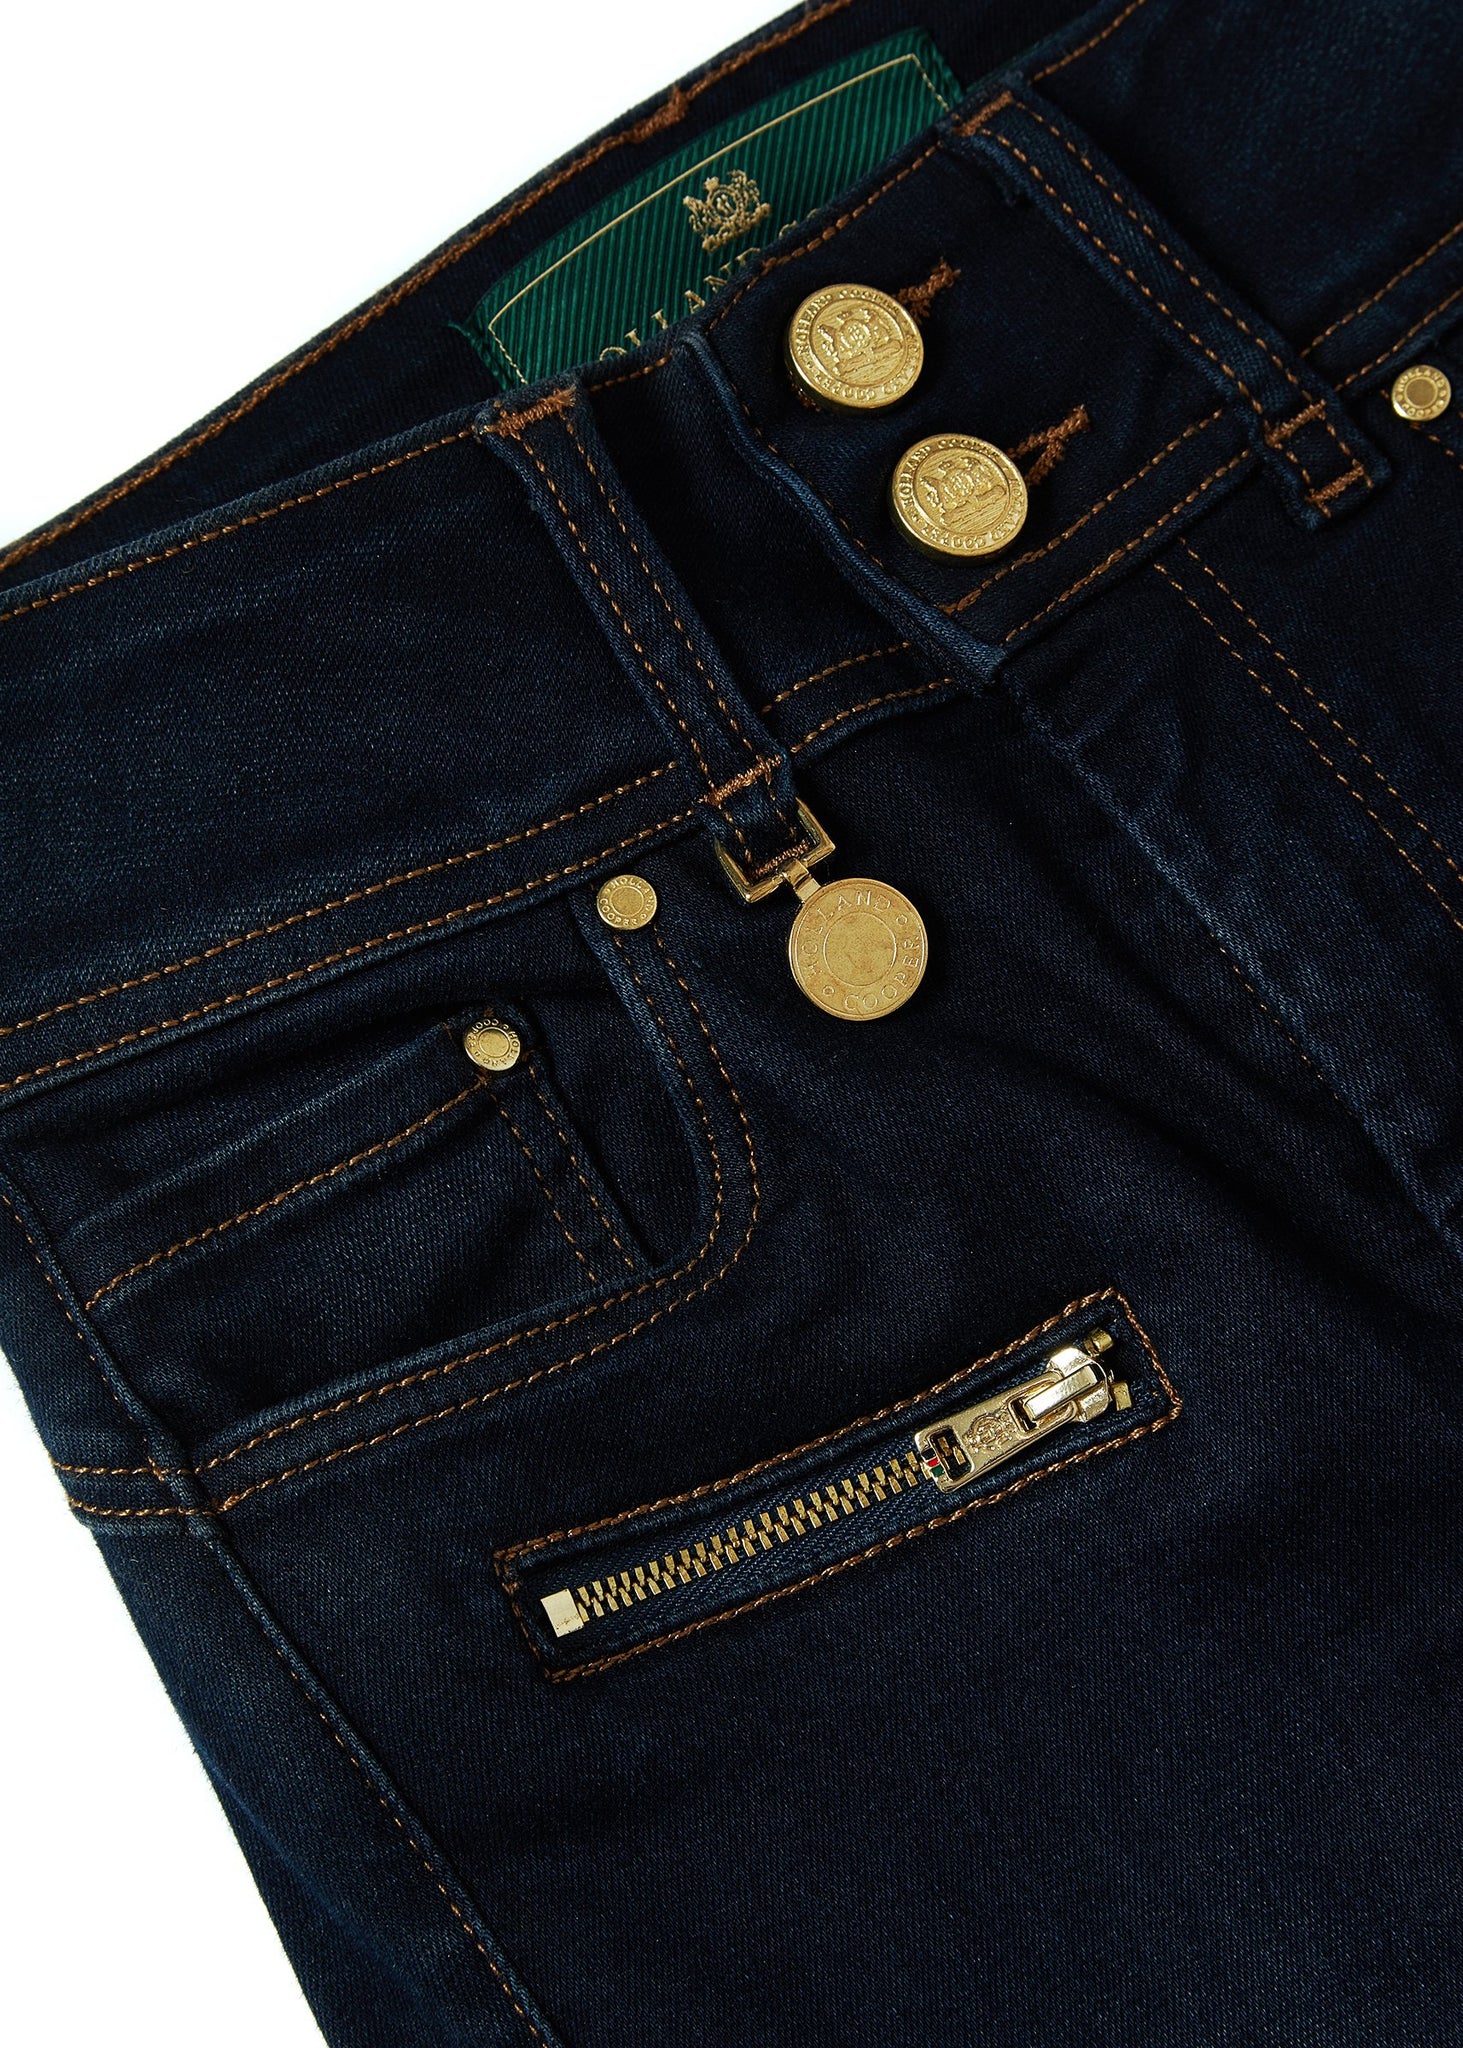 front pocket detail on womens high rise dark blue skinny stretch jean with pin tuck biker panels to front and two open zip pockets on front with HC embroidery to left pocket facing